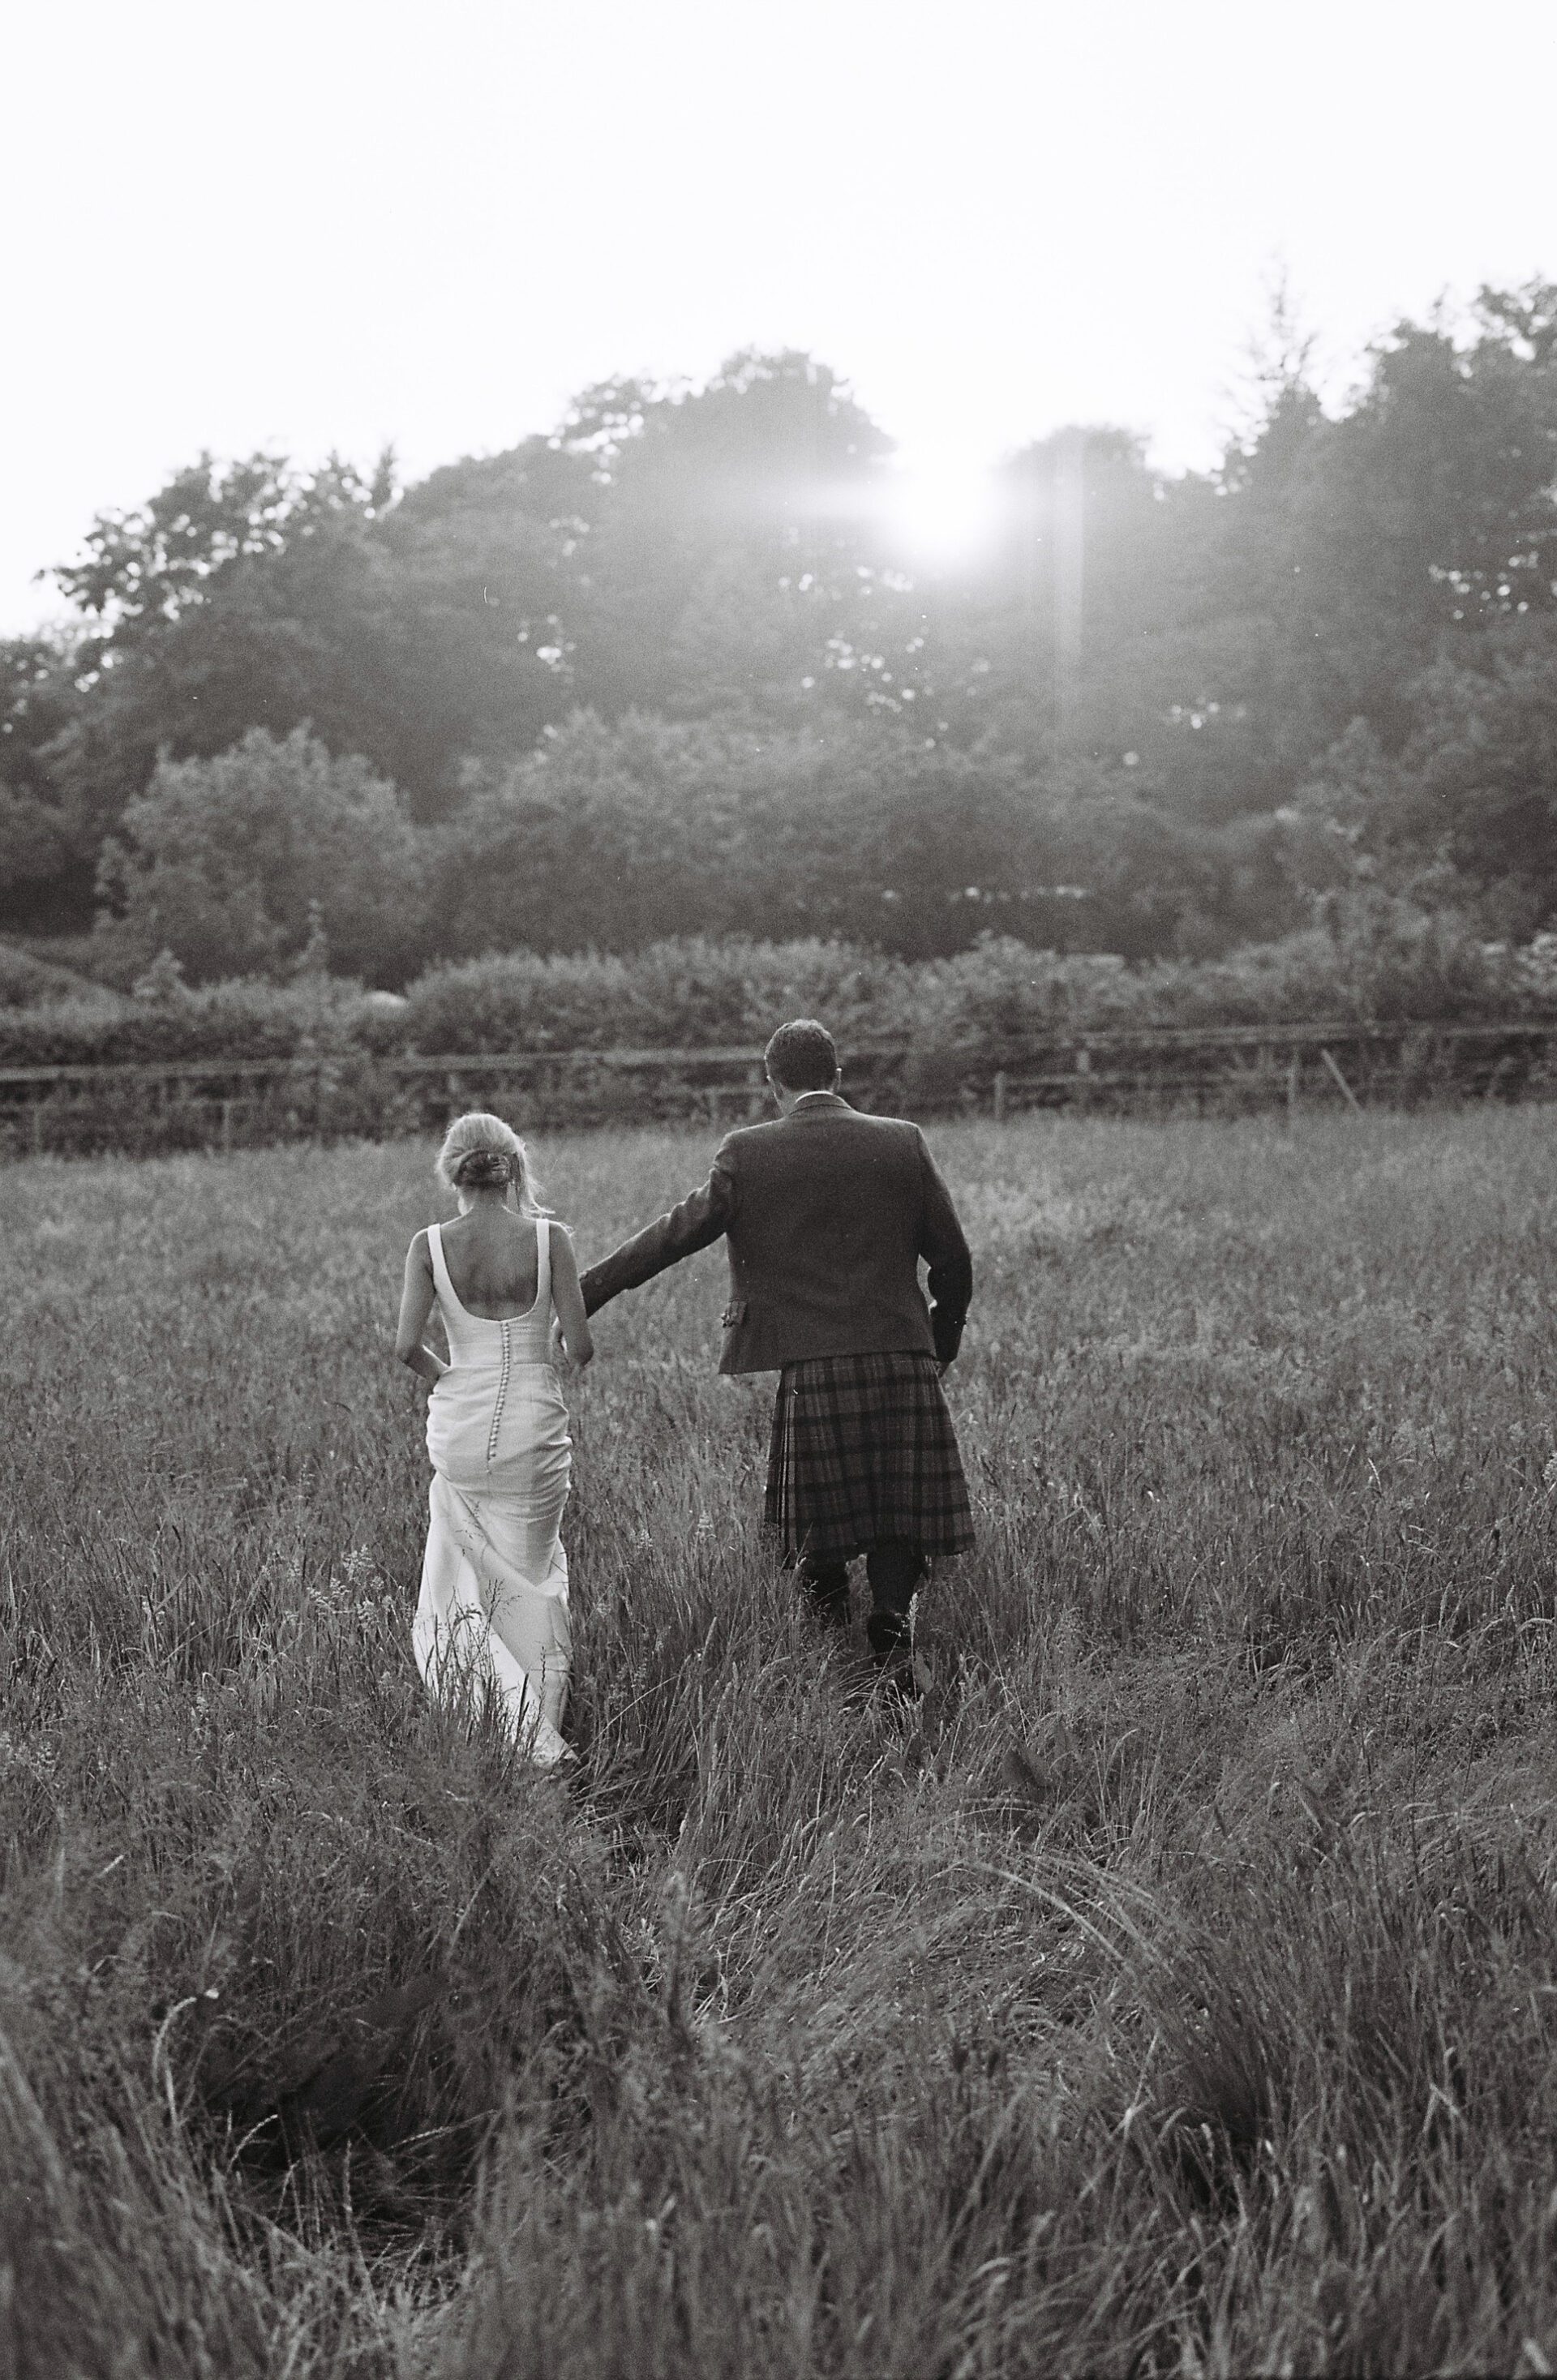 A couple walking through a field during golden hour, captured on 35mm film